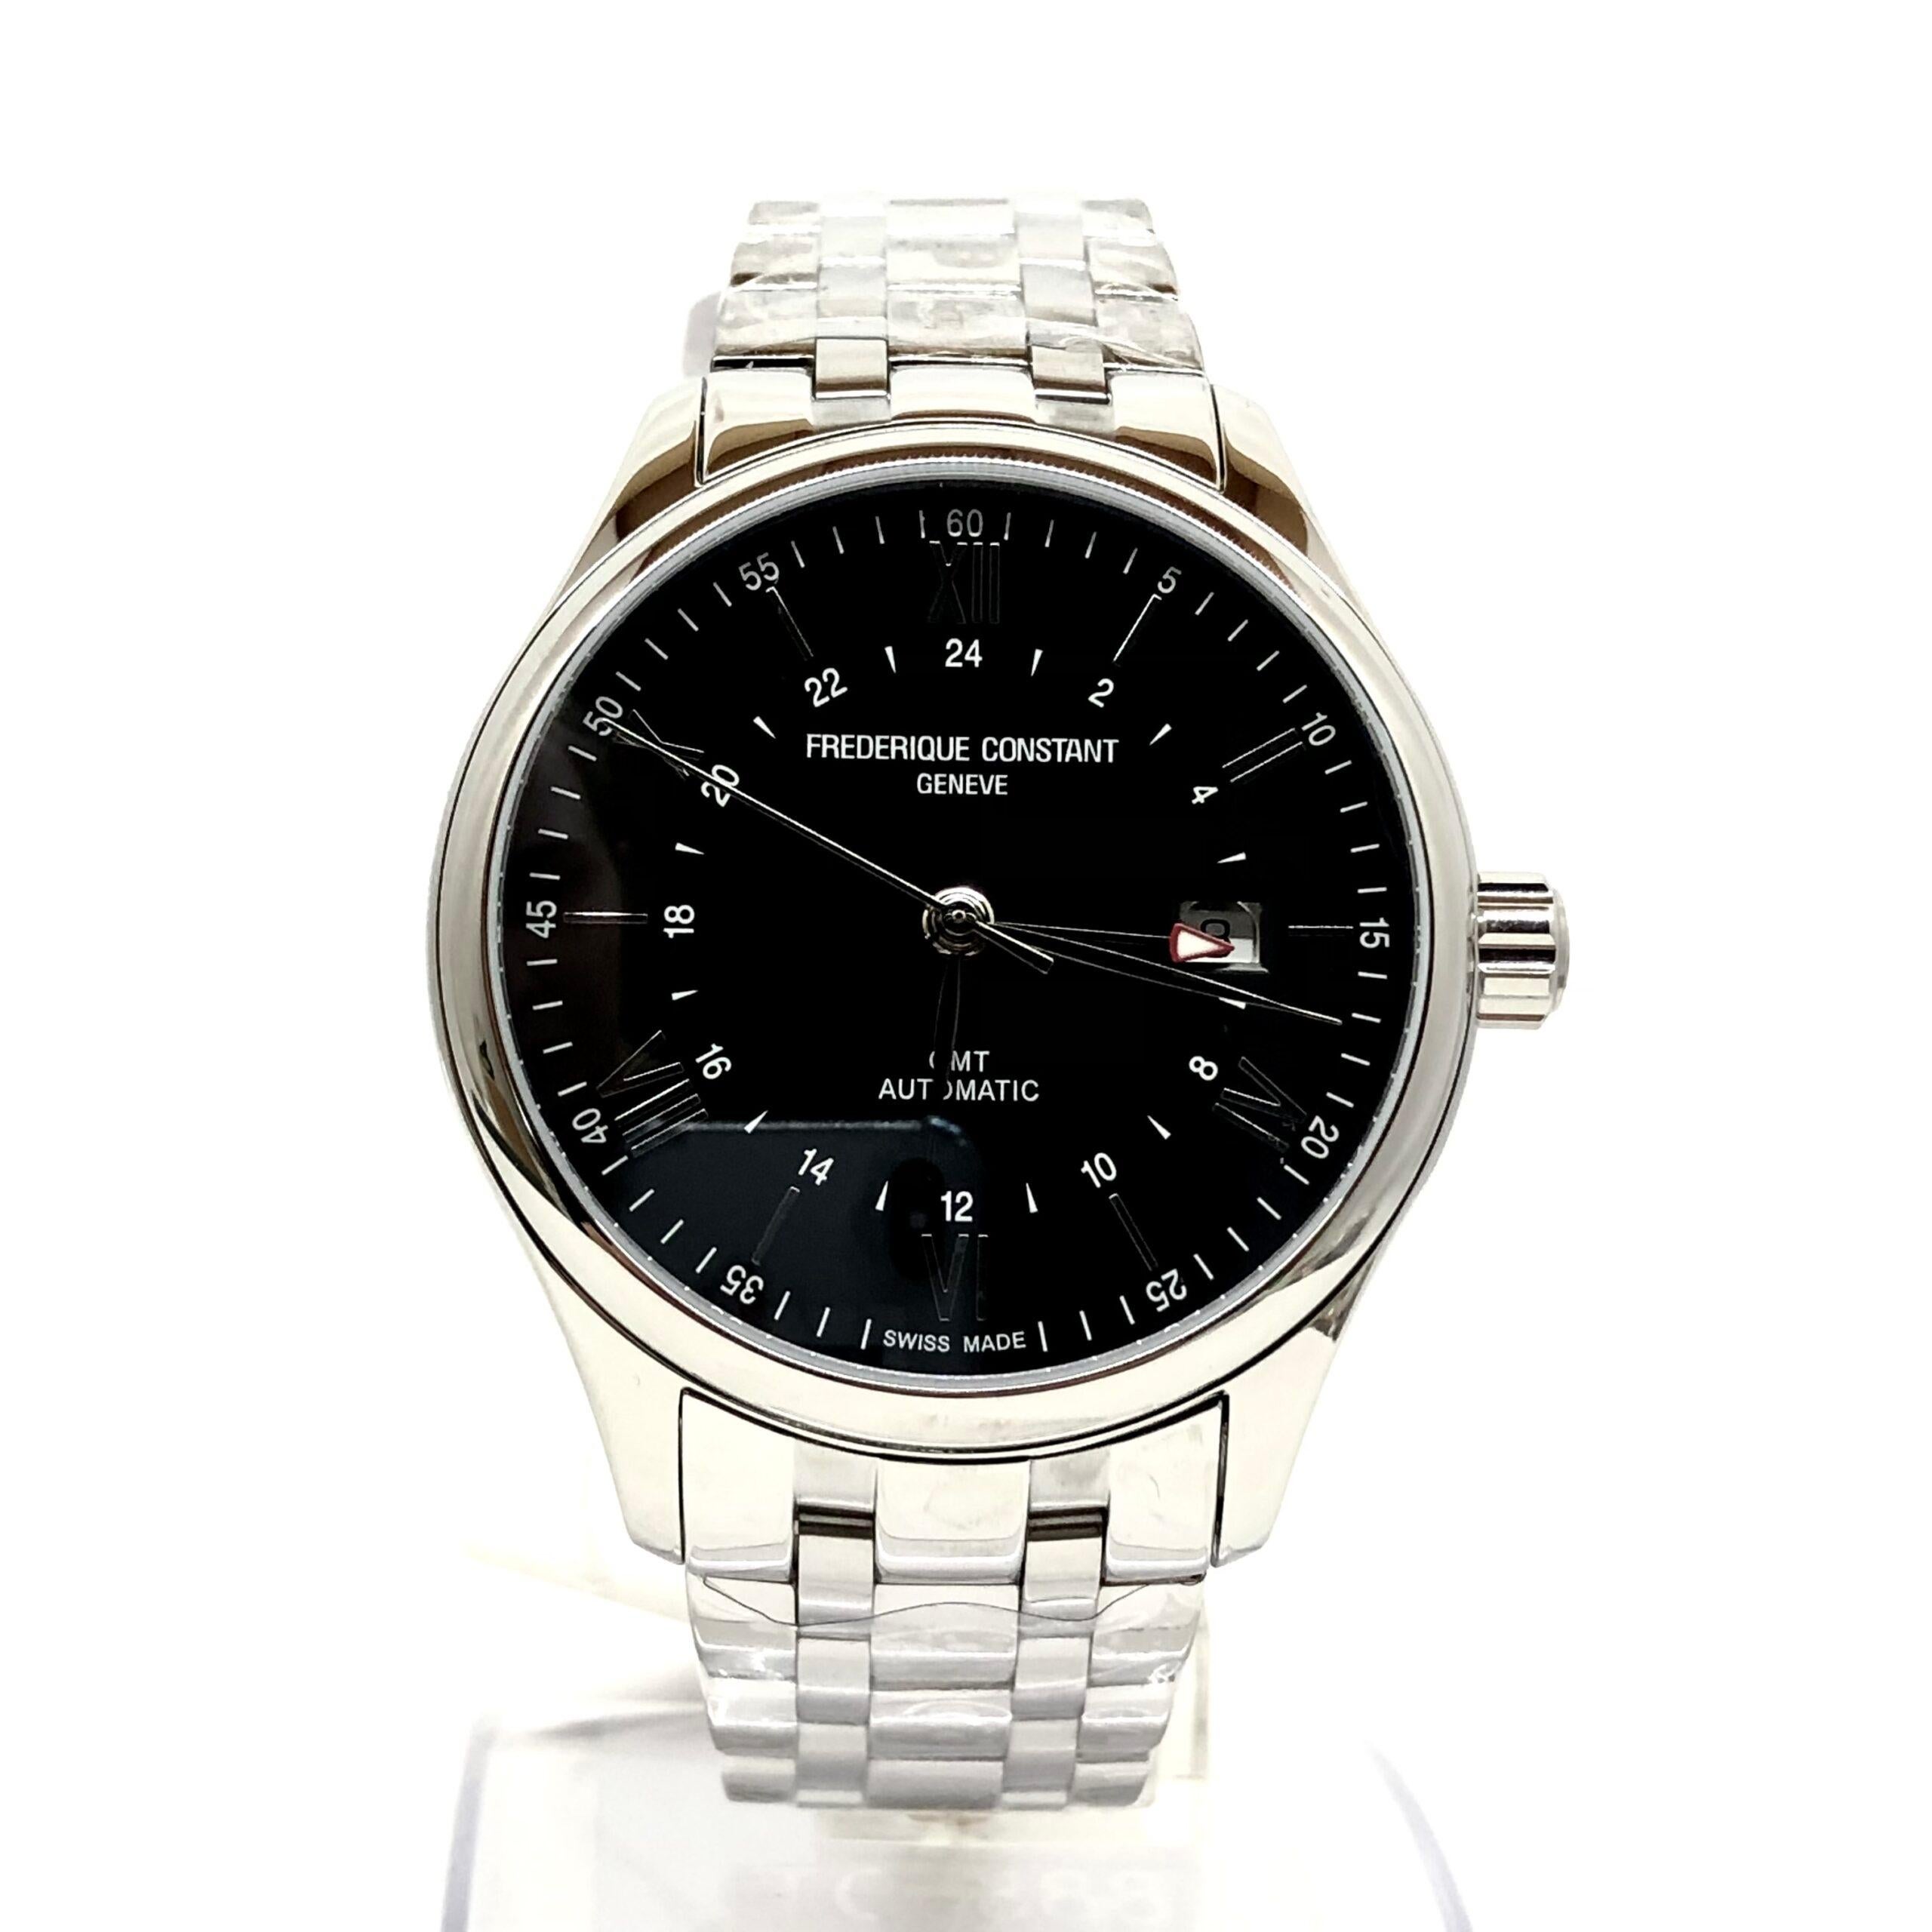 This Men’s watch has a 42 mm round stainless steel case with fixed bezel. Black dial with silver-tone leaf-style shape hands & index and Roman numerals hour markers. Scratch-resistant sapphire crystal. Date sub-dial located at the 3 o’clock